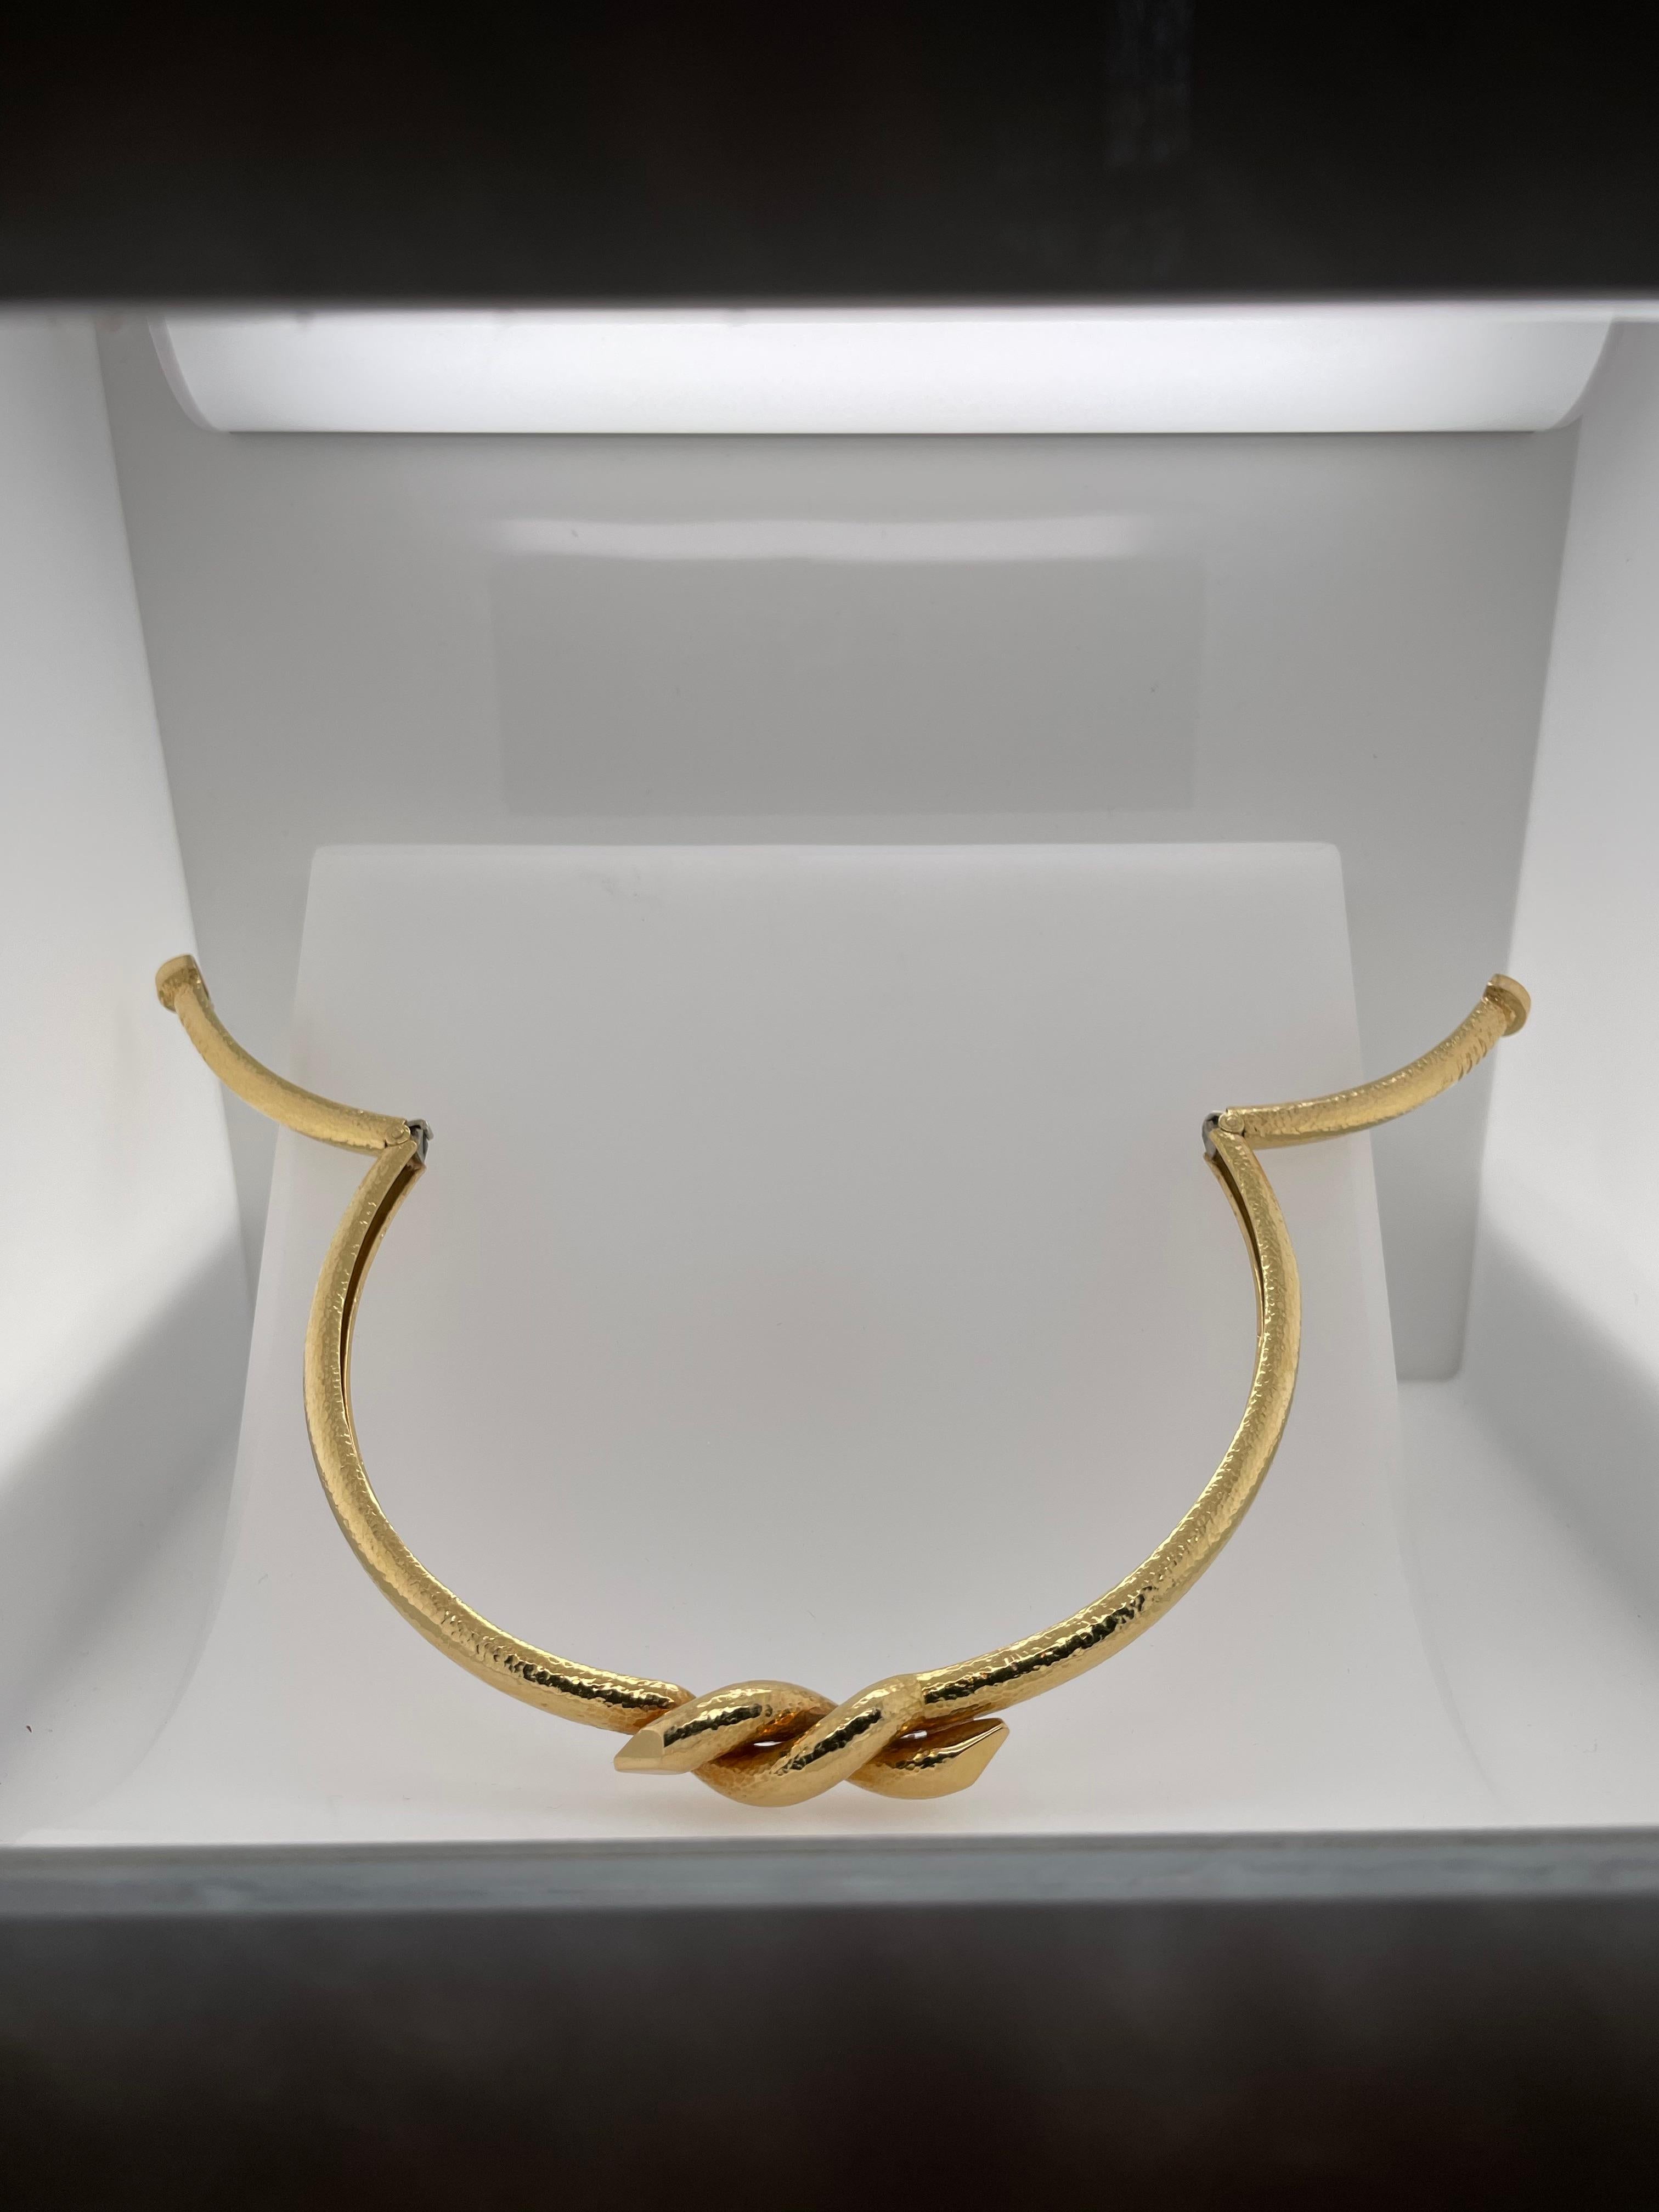 Stunning 18K Yellow Gold Twisted Nail choker from the famous house of David Webb.  This rare and sought after peice is currently available from the House of David Webb, Nail Collection.  The hand crafted piece is solid 18K Yellow Gold in his